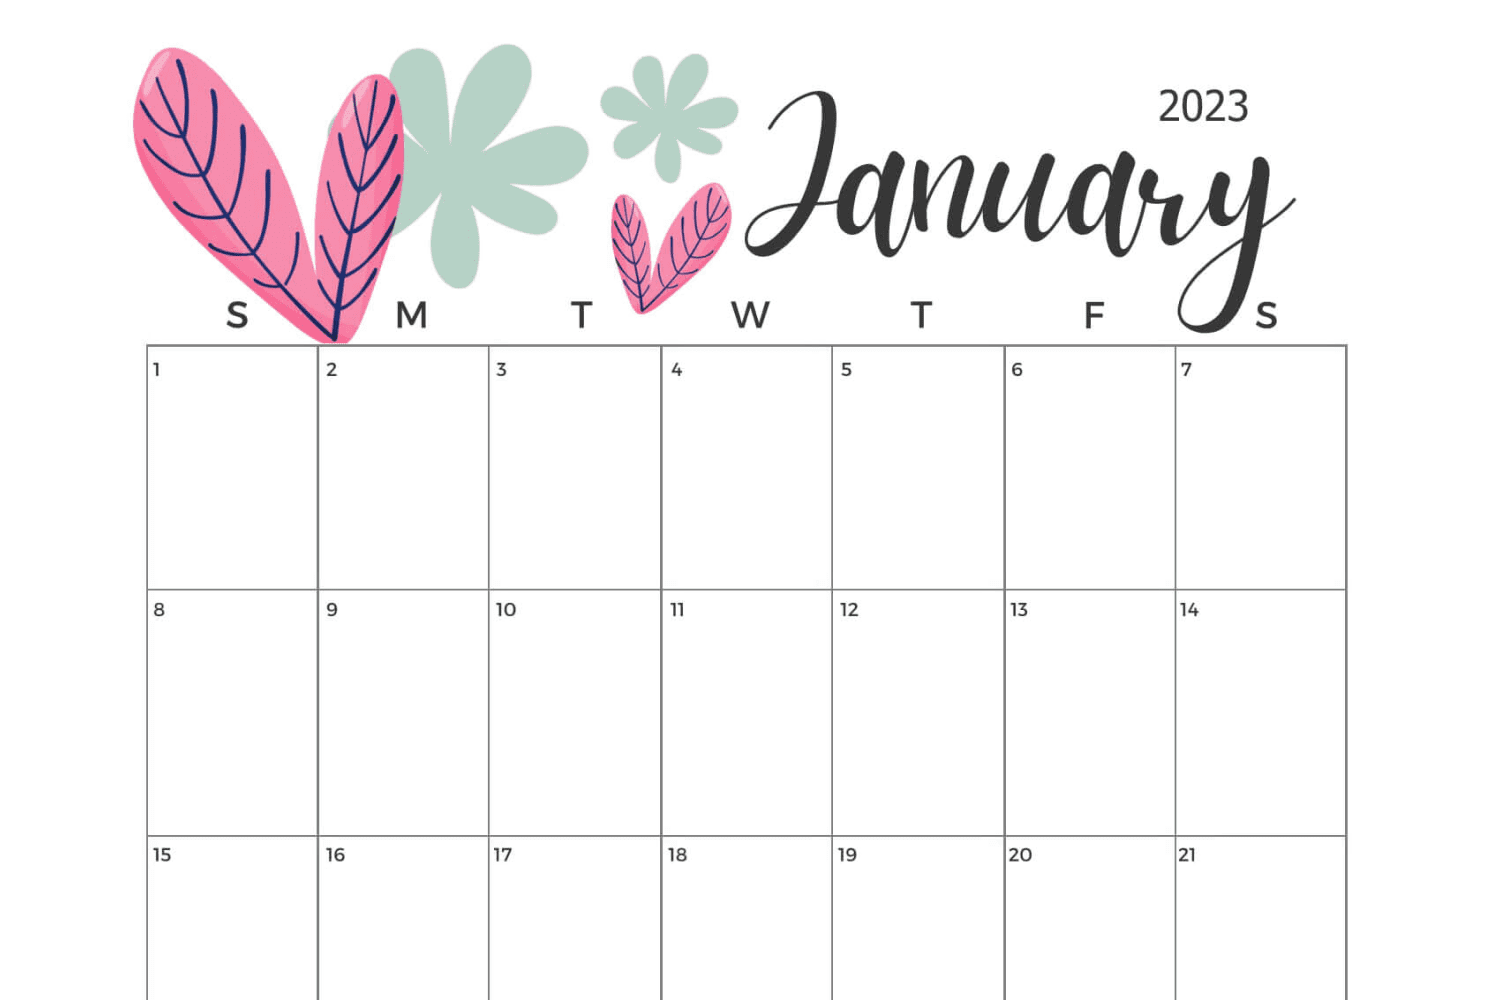 Calendar for january with white background painted pink leaves and green flowers.